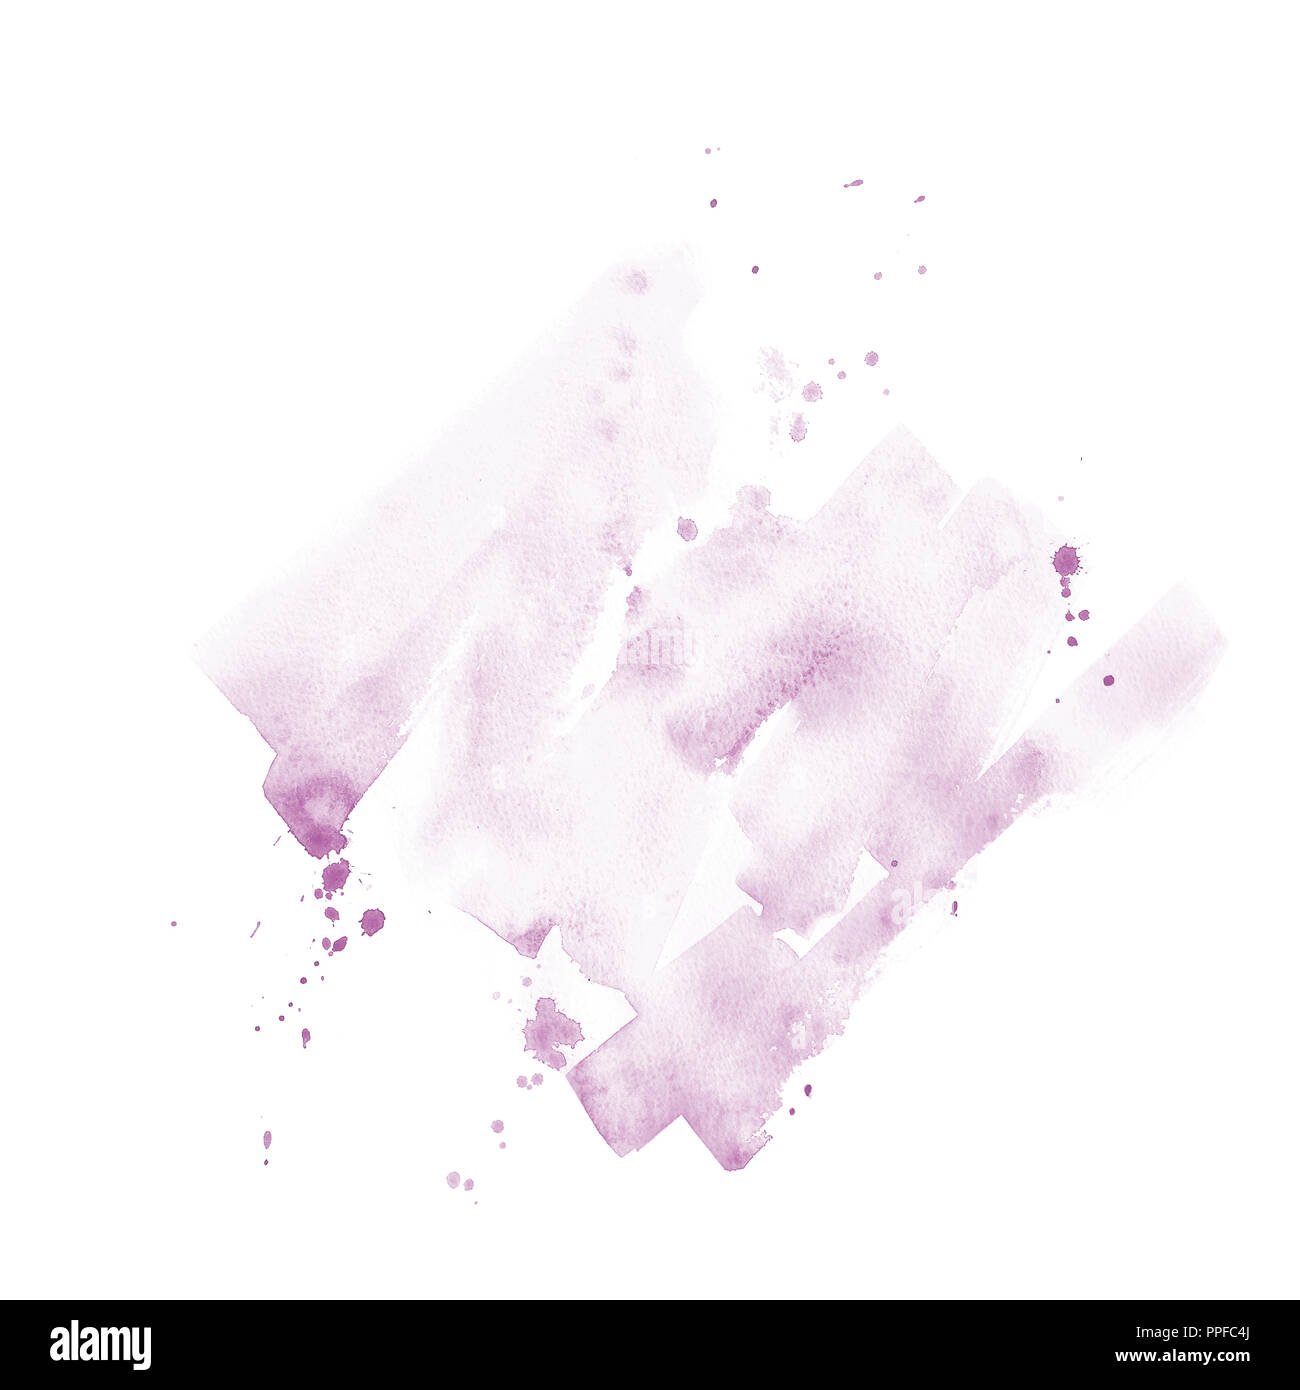 Watercolor hand drawn background violet with splash. Stock Photo